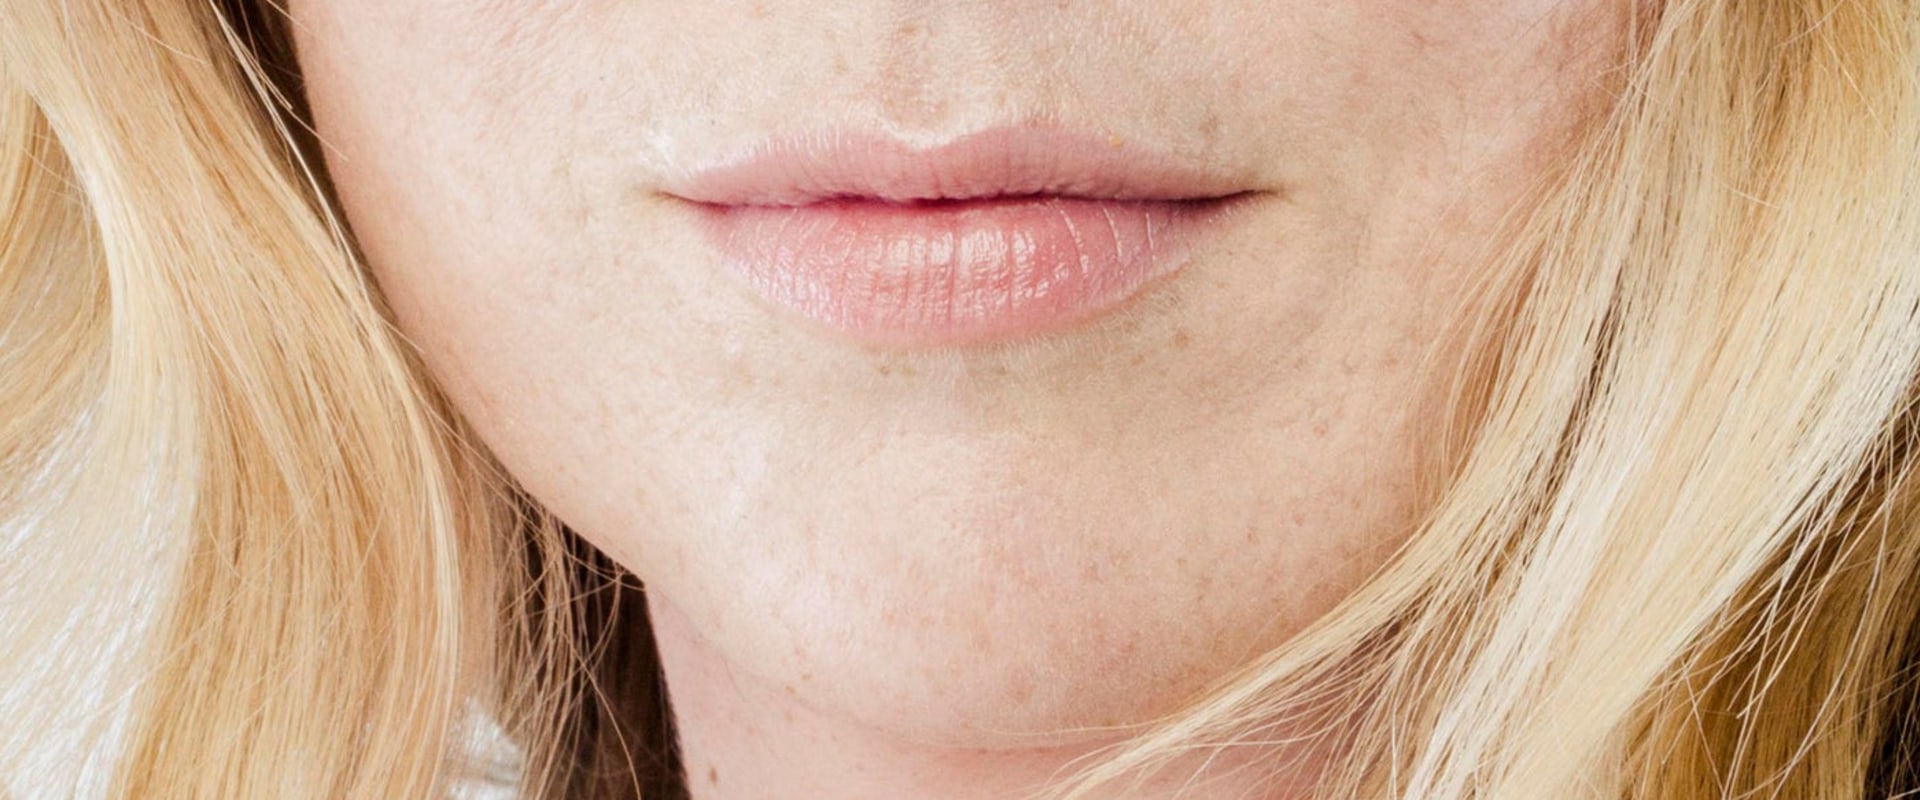 Why is juvederm so expensive?